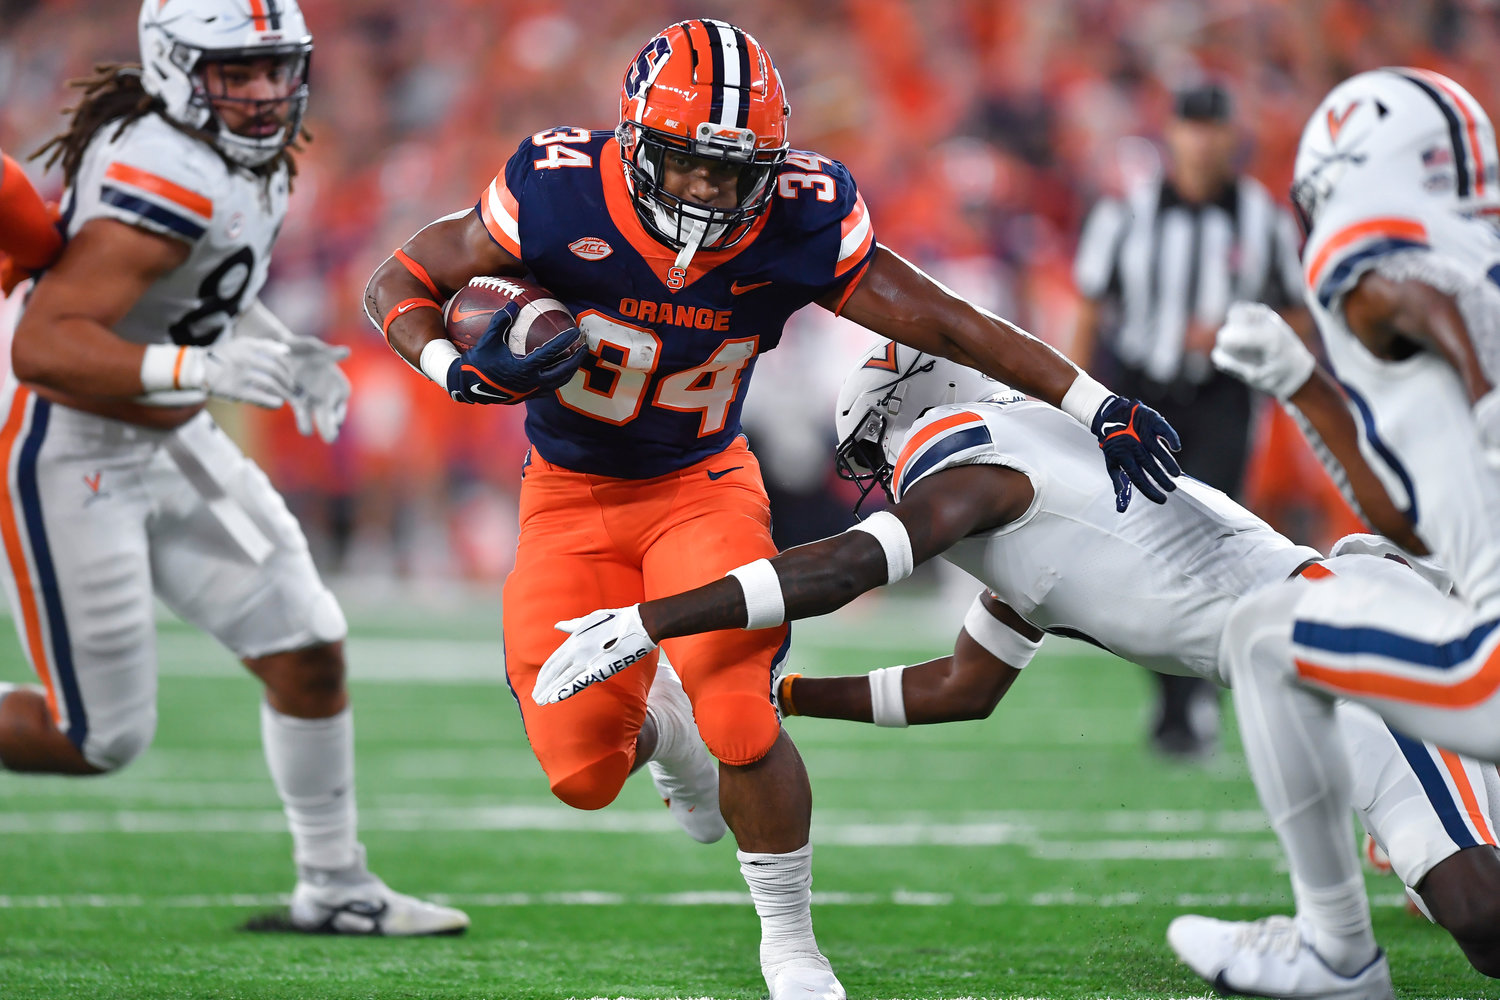 Syracuse running back Sean Tucker (34) tries to break a tackle by Virginia cornerback Anthony Johnson during the first half on Friday night in Syracuse.